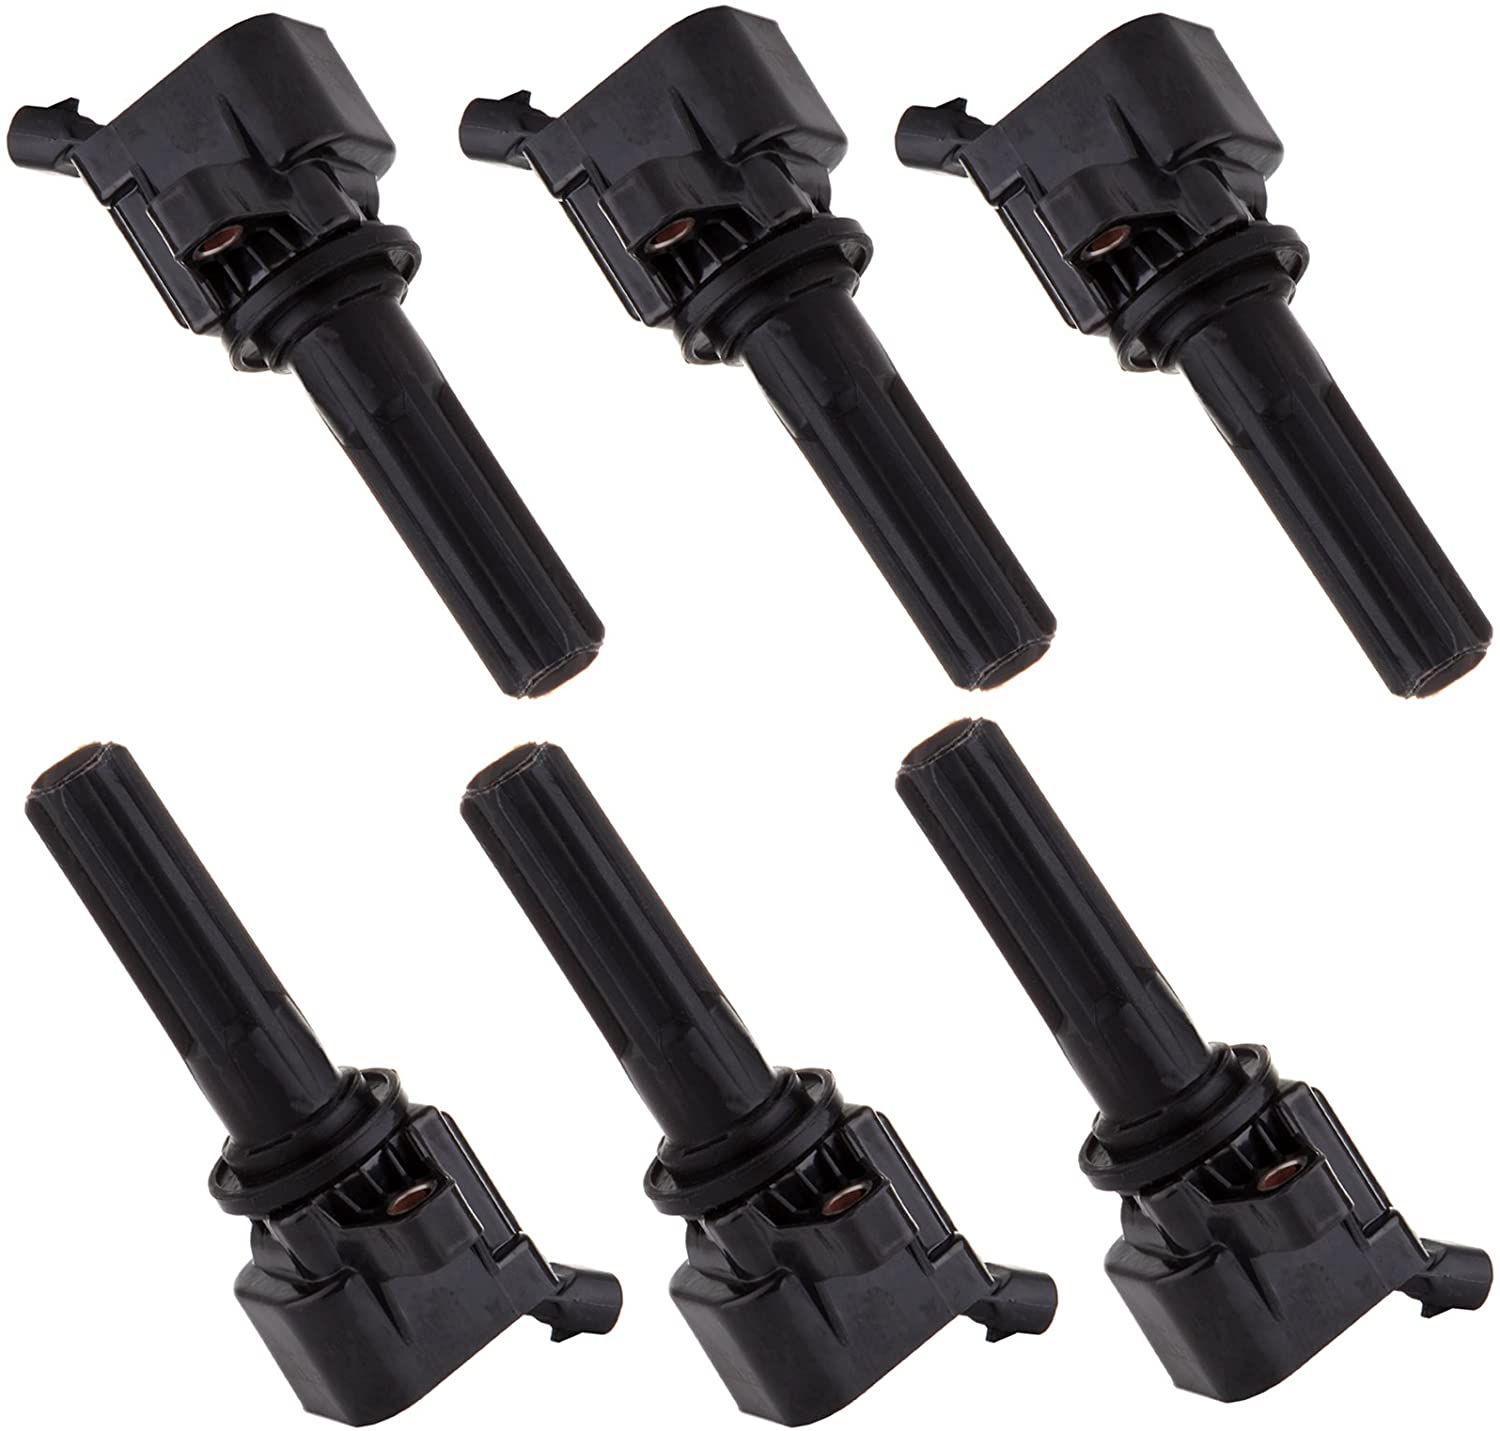 SCITOO 100% New 6pcs Ignition Coil Set Compatible with Hummer GMC Saab Buick Chev-y 2006-2012 Automobiles Fit for OE: UF497 C1558